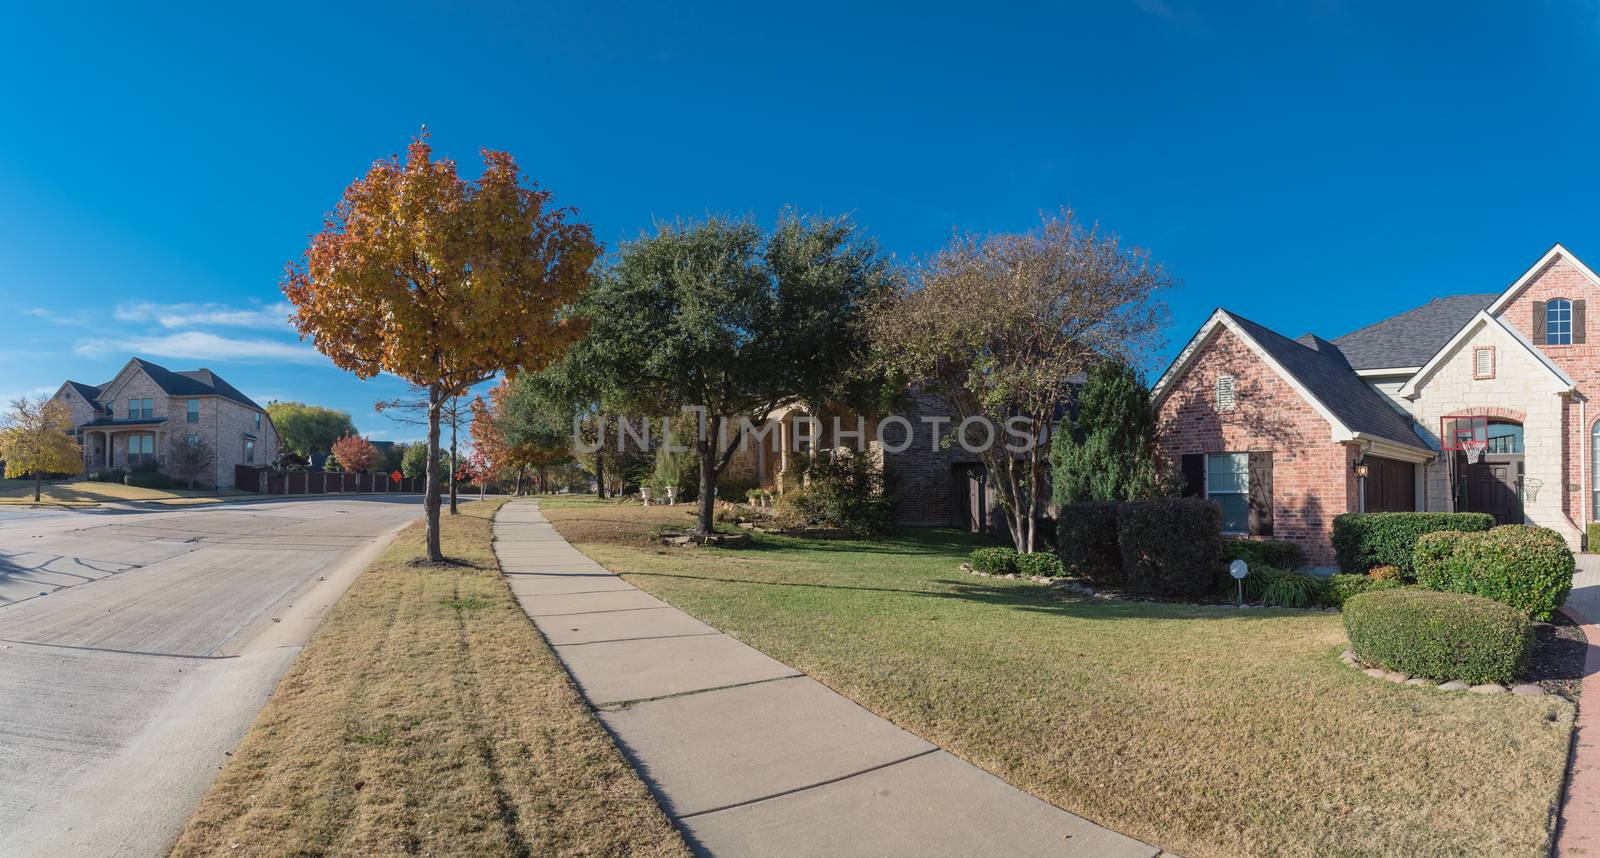 Panoramic view colorful sidewalk pathway in residential area suburban Dallas, Texas, USA in fall season by trongnguyen